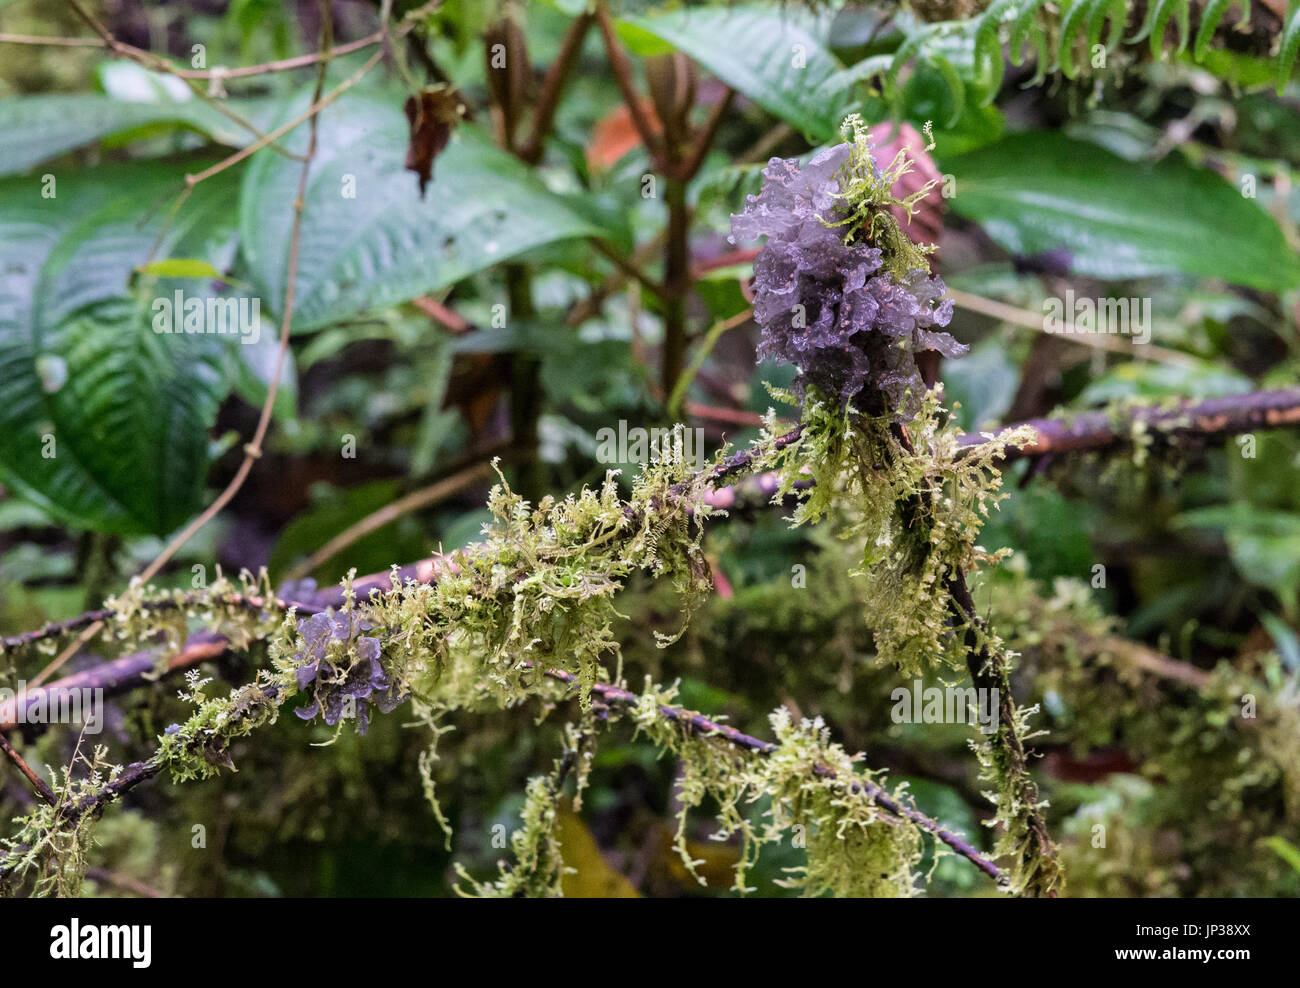 Strange translucent purple fungi growing on moss covered tree branch in the forest of Andes Mountains. Colombia, South America Stock Photo